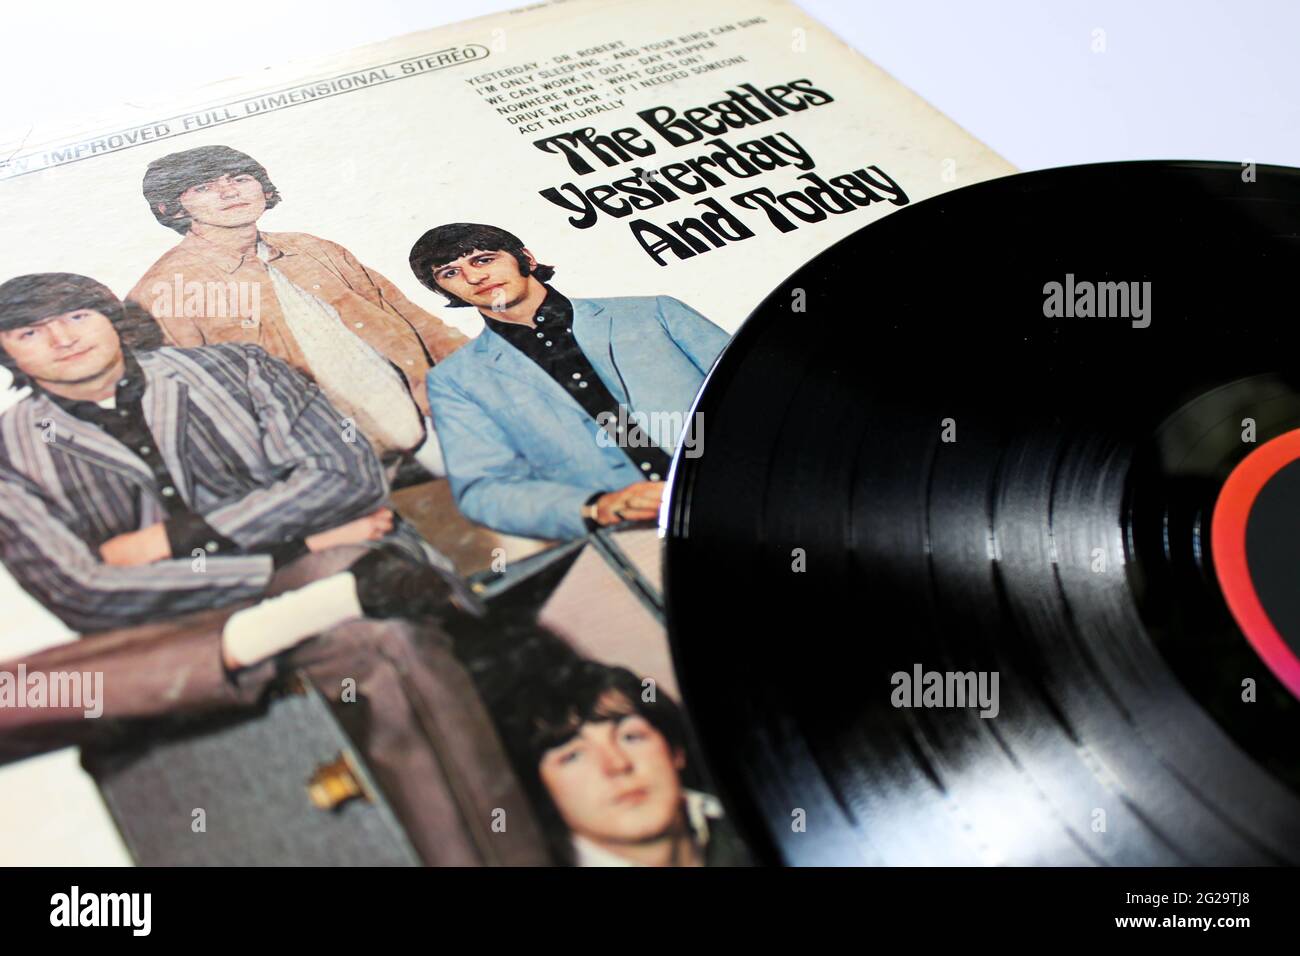 English rock band The Beatles music album on vinyl record LP disc. Titled: Yesterday and Today album cover Stock Photo